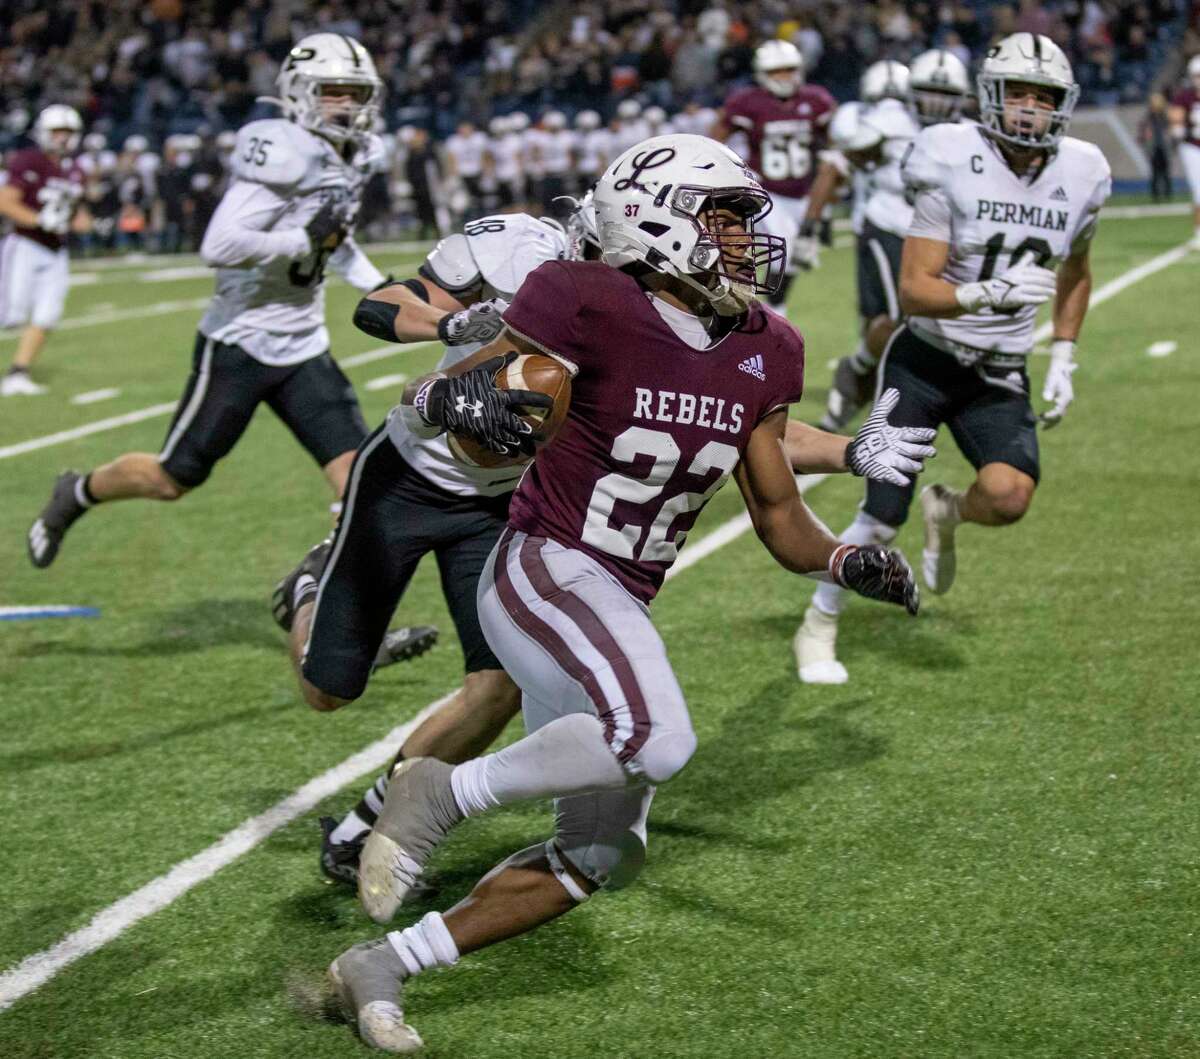 Legacy’s Makhilyn Young (22) runs the ball as Permian’s Deonte Bass attempts to push him out of bounds on Friday, Nov. 5, 2021 at Grande Communications Stadium. Jacy Lewis/Reporter-Telegram